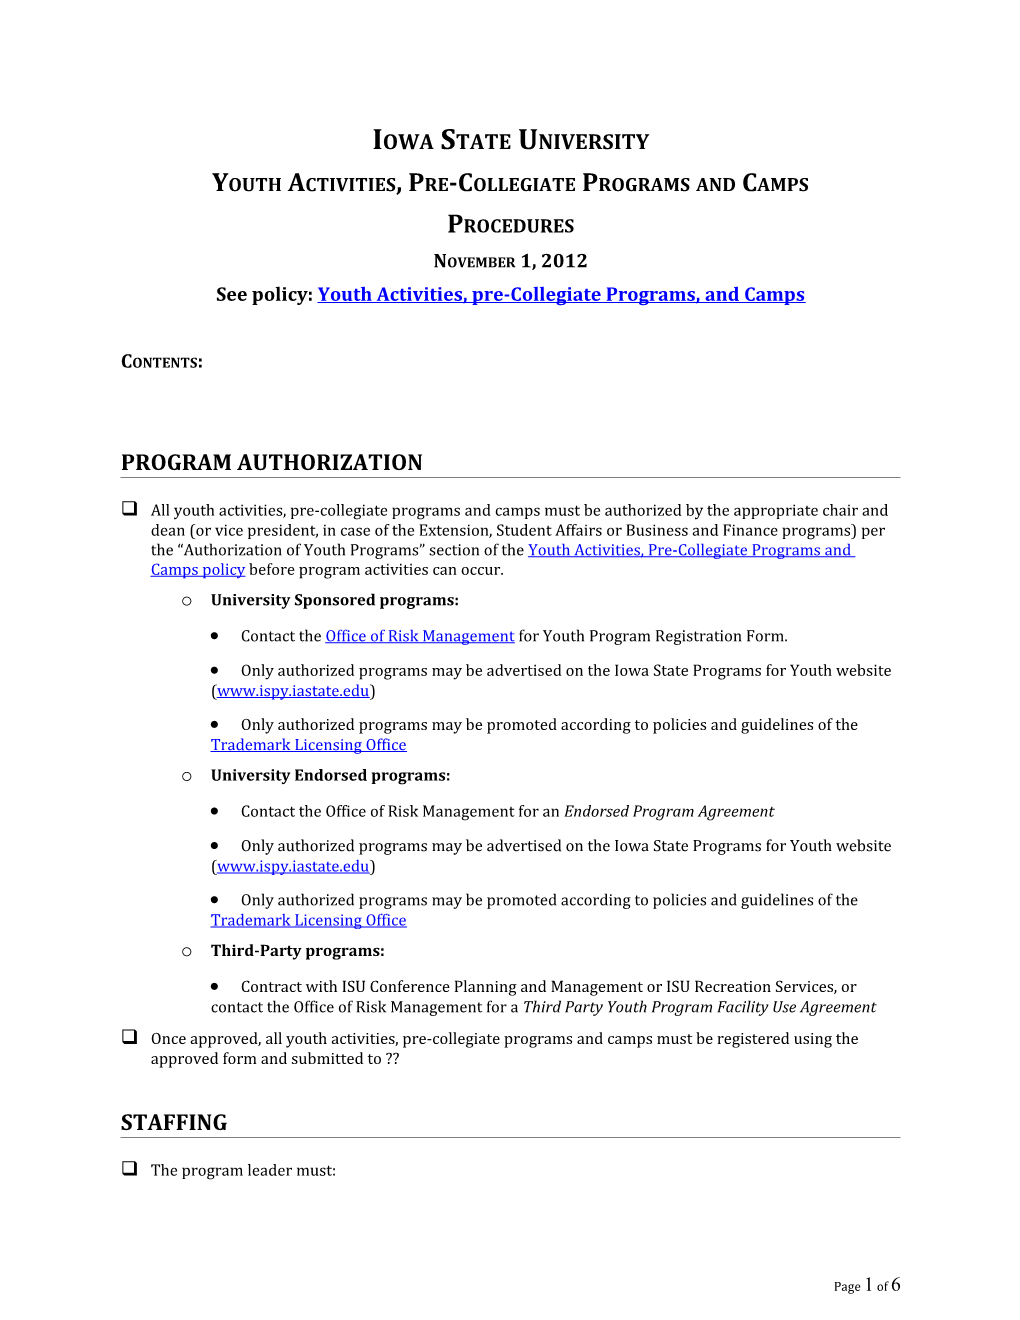 Youth Activities, Pre-Collegiate Programs and Camps